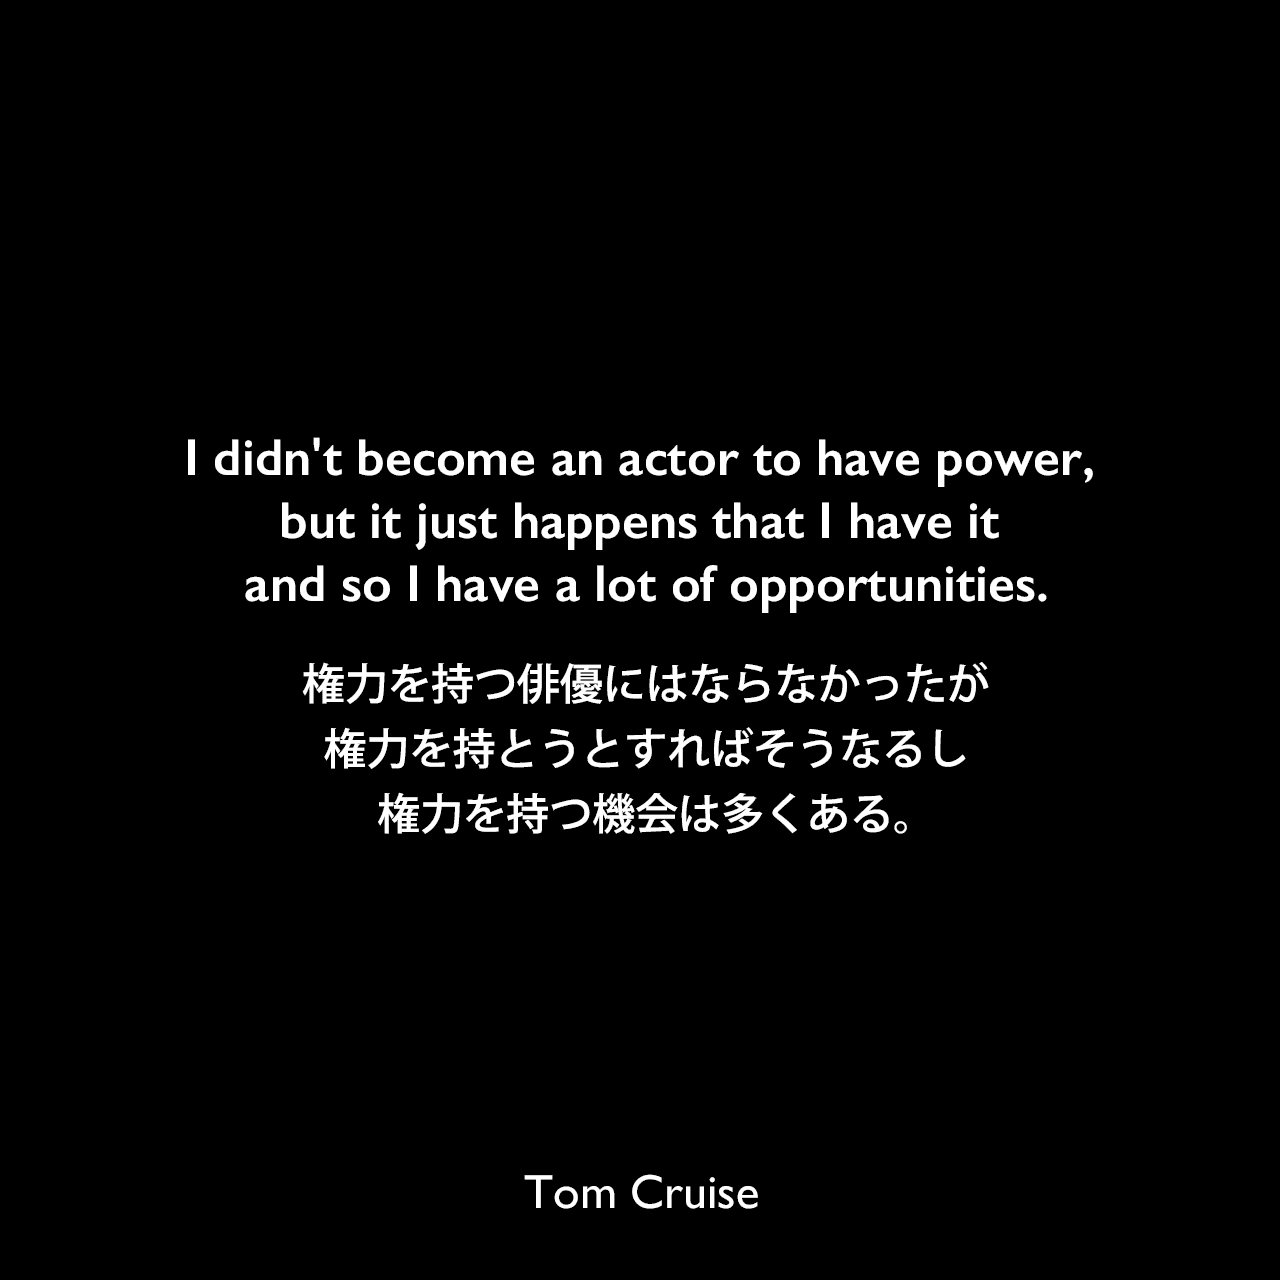 I didn't become an actor to have power, but it just happens that I have it and so I have a lot of opportunities.権力を持つ俳優にはならなかったが、権力を持とうとすればそうなるし、権力を持つ機会は多くある。Tom Cruise